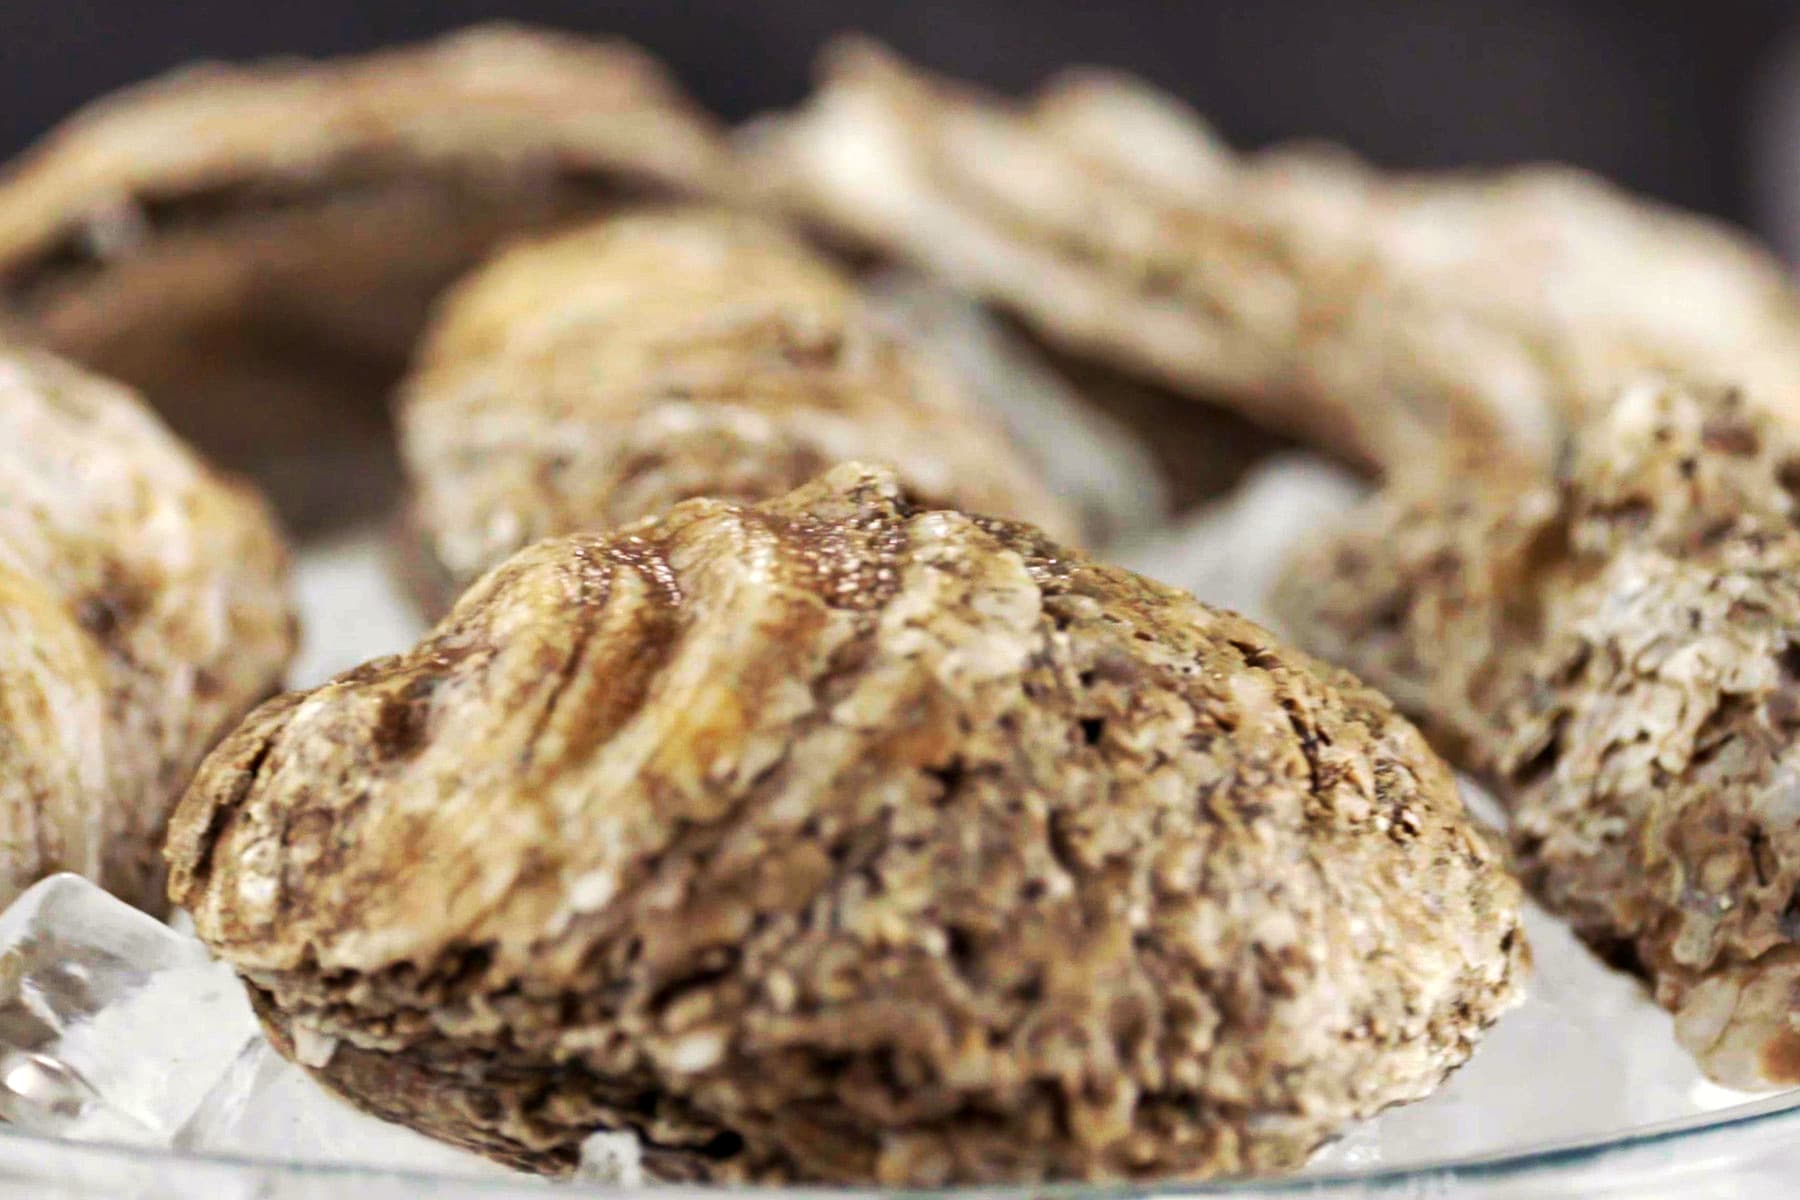 U.S. Norovirus Cases Linked to Canadian Oysters